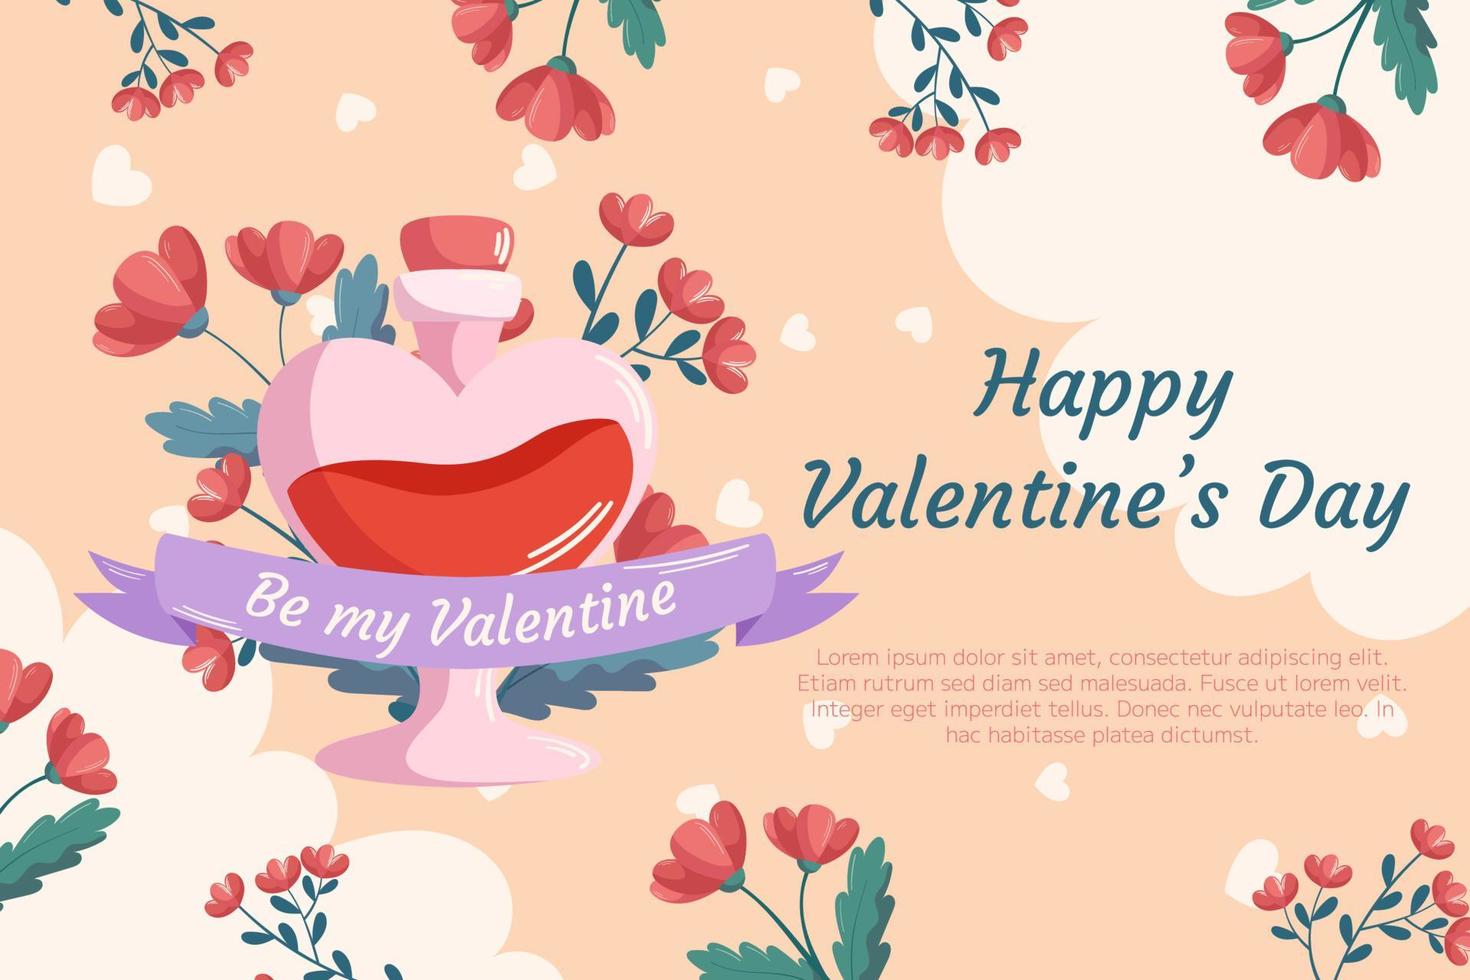 St. Valentine's Day background design with Love potion bottle concept illustration with red flowers behind it with ribbon on beige backdrop. Greeting card, decorative hearts and clouds on the back vector